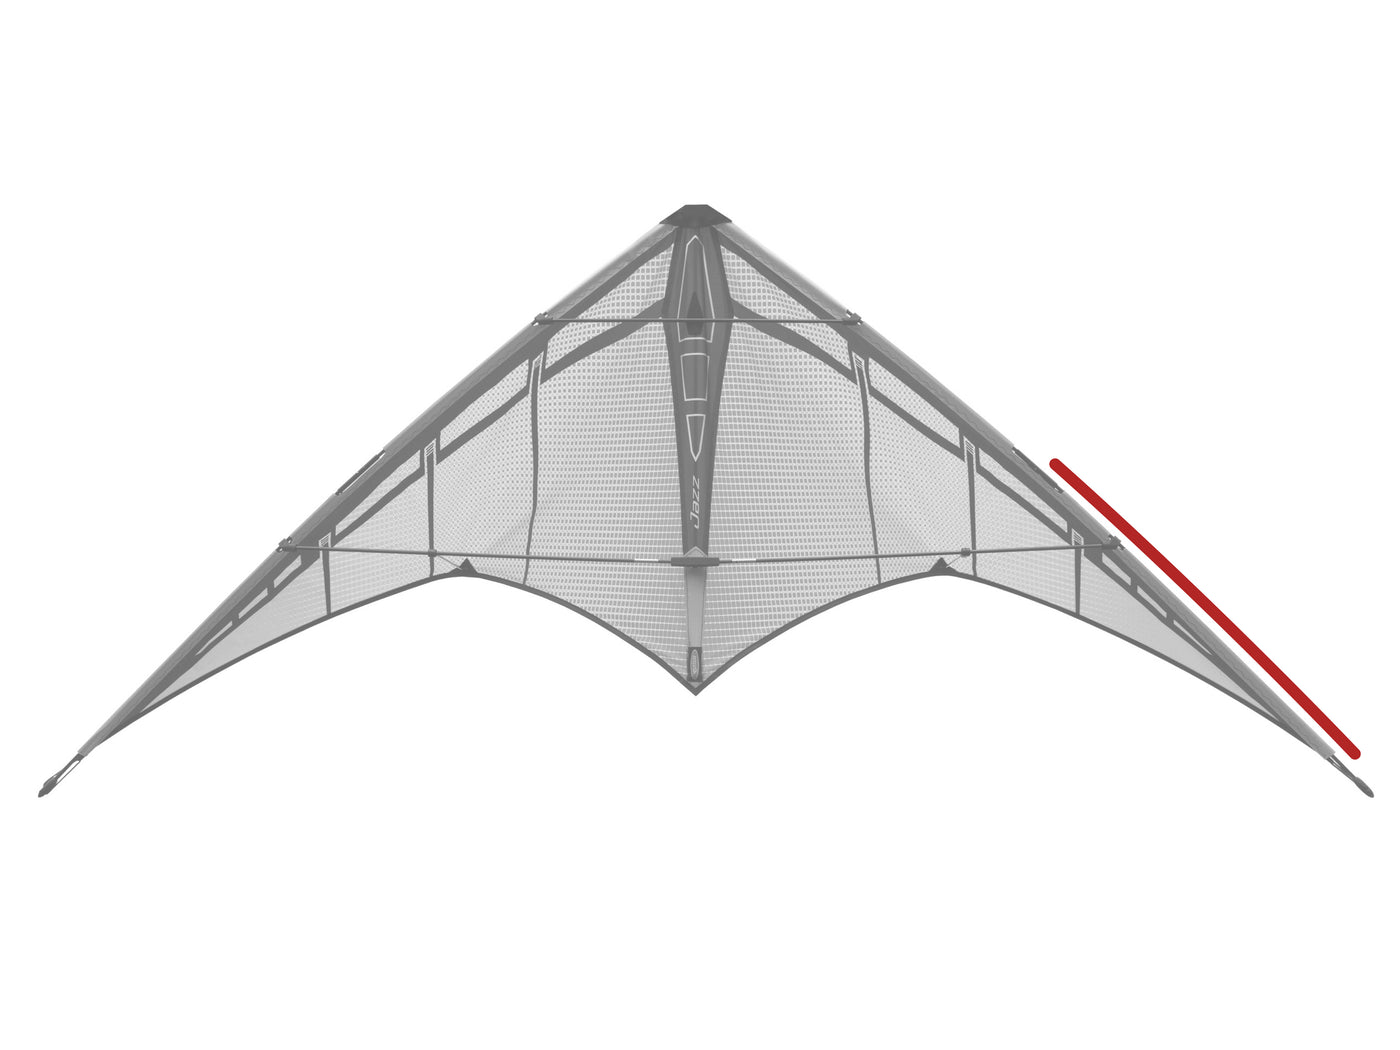 Diagram showing location of the Jazz Lower Leading Edge on the kite.